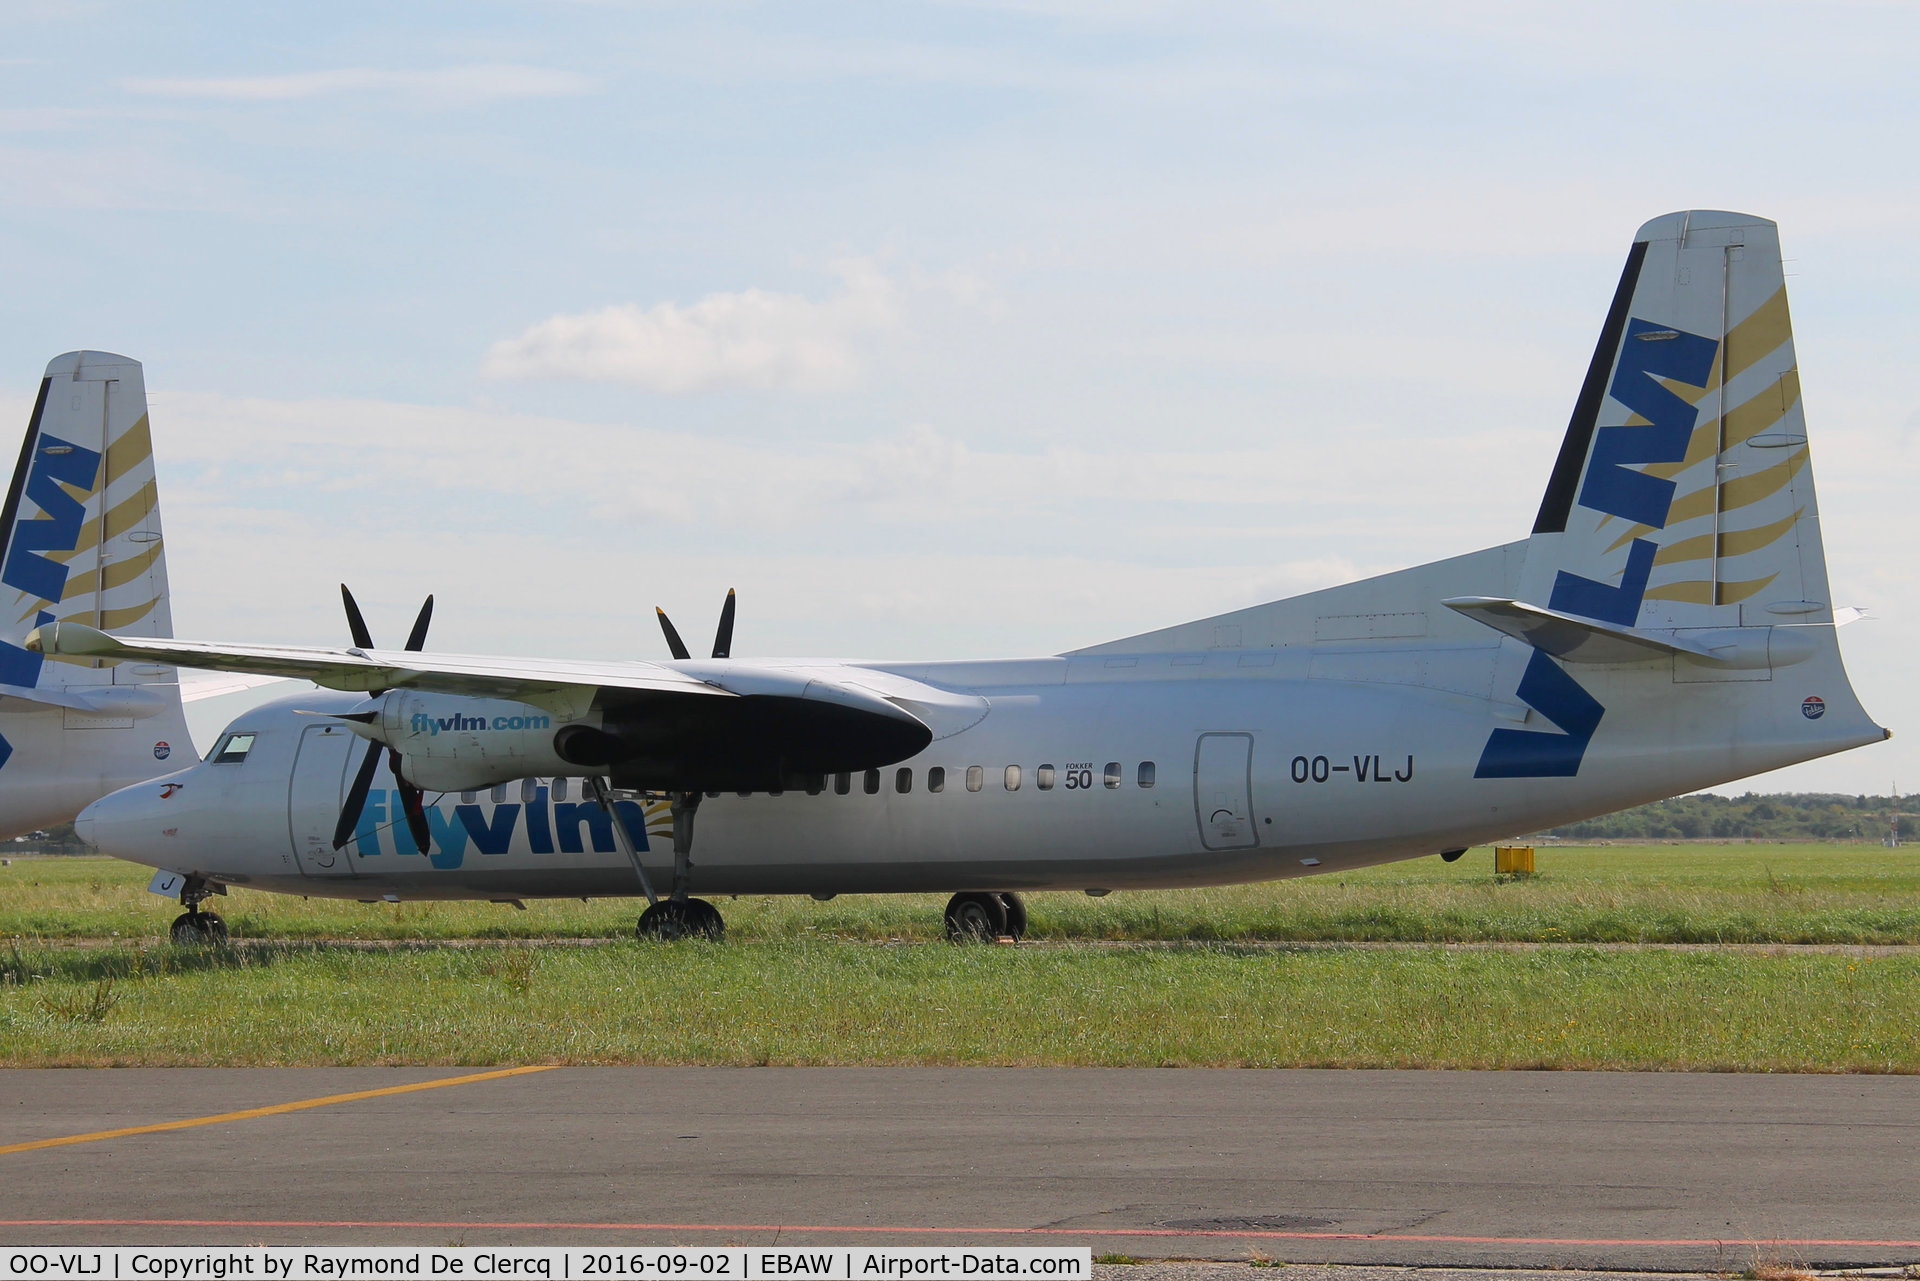 OO-VLJ, 1987 Fokker 50 C/N 20105, Out of service since 2016-06-22 ( bankcruptcy VLM )